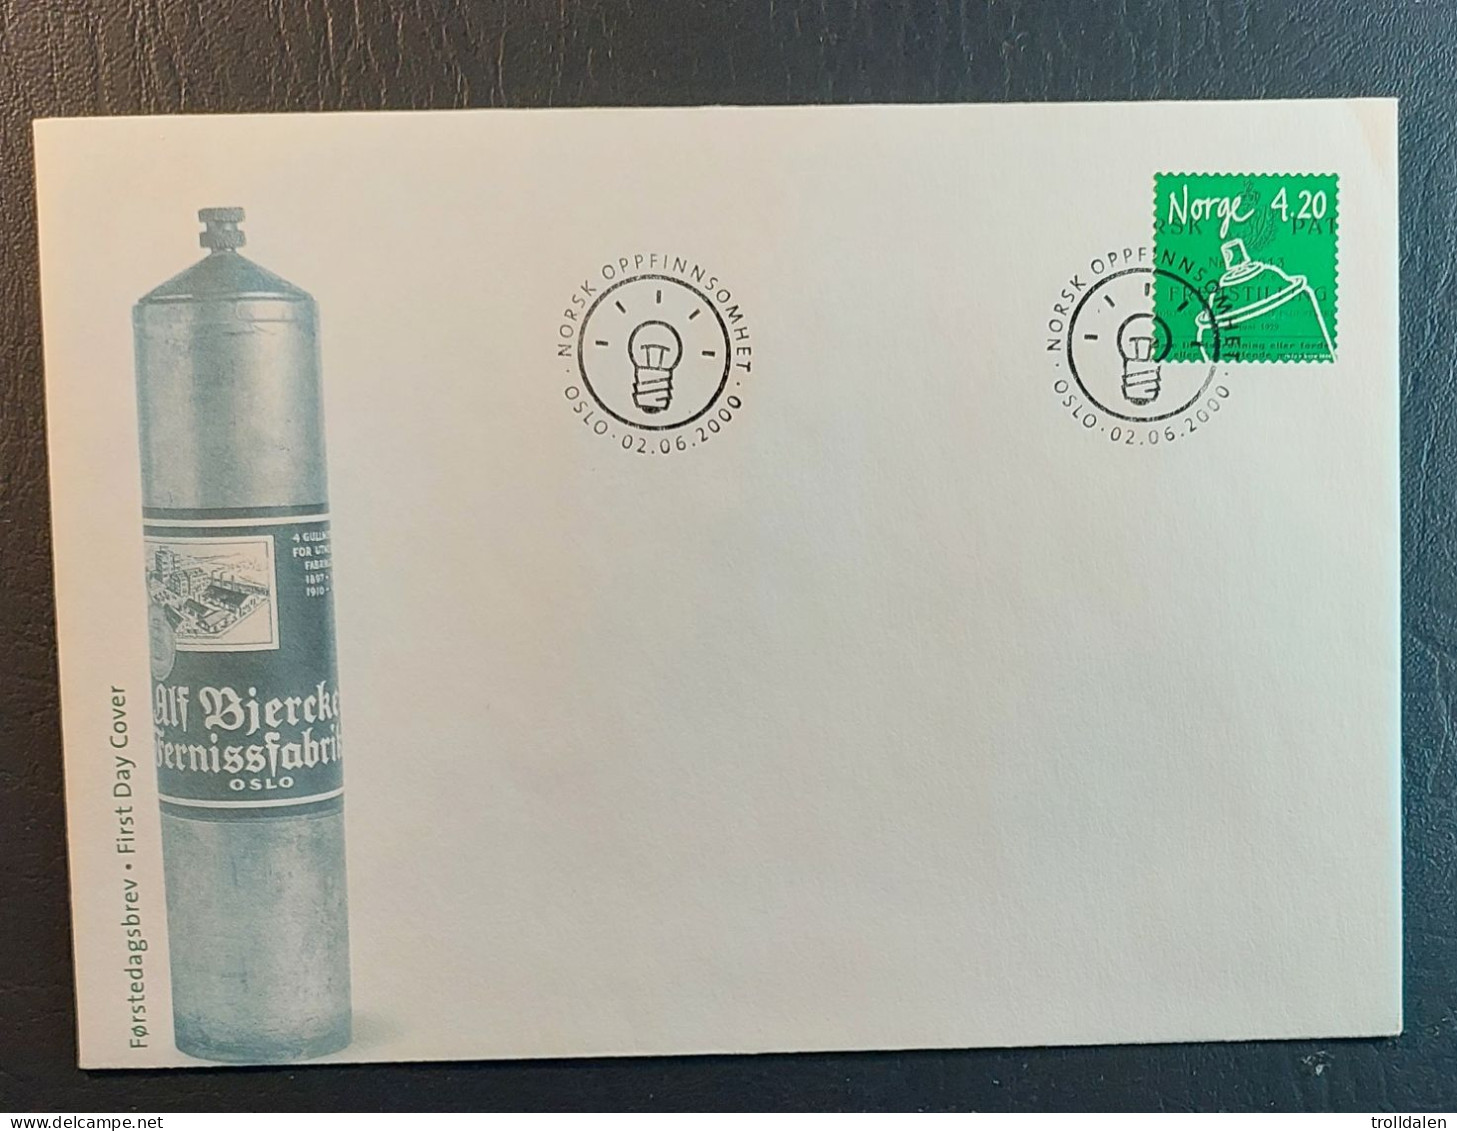 Norway FDC 2000 - FDC